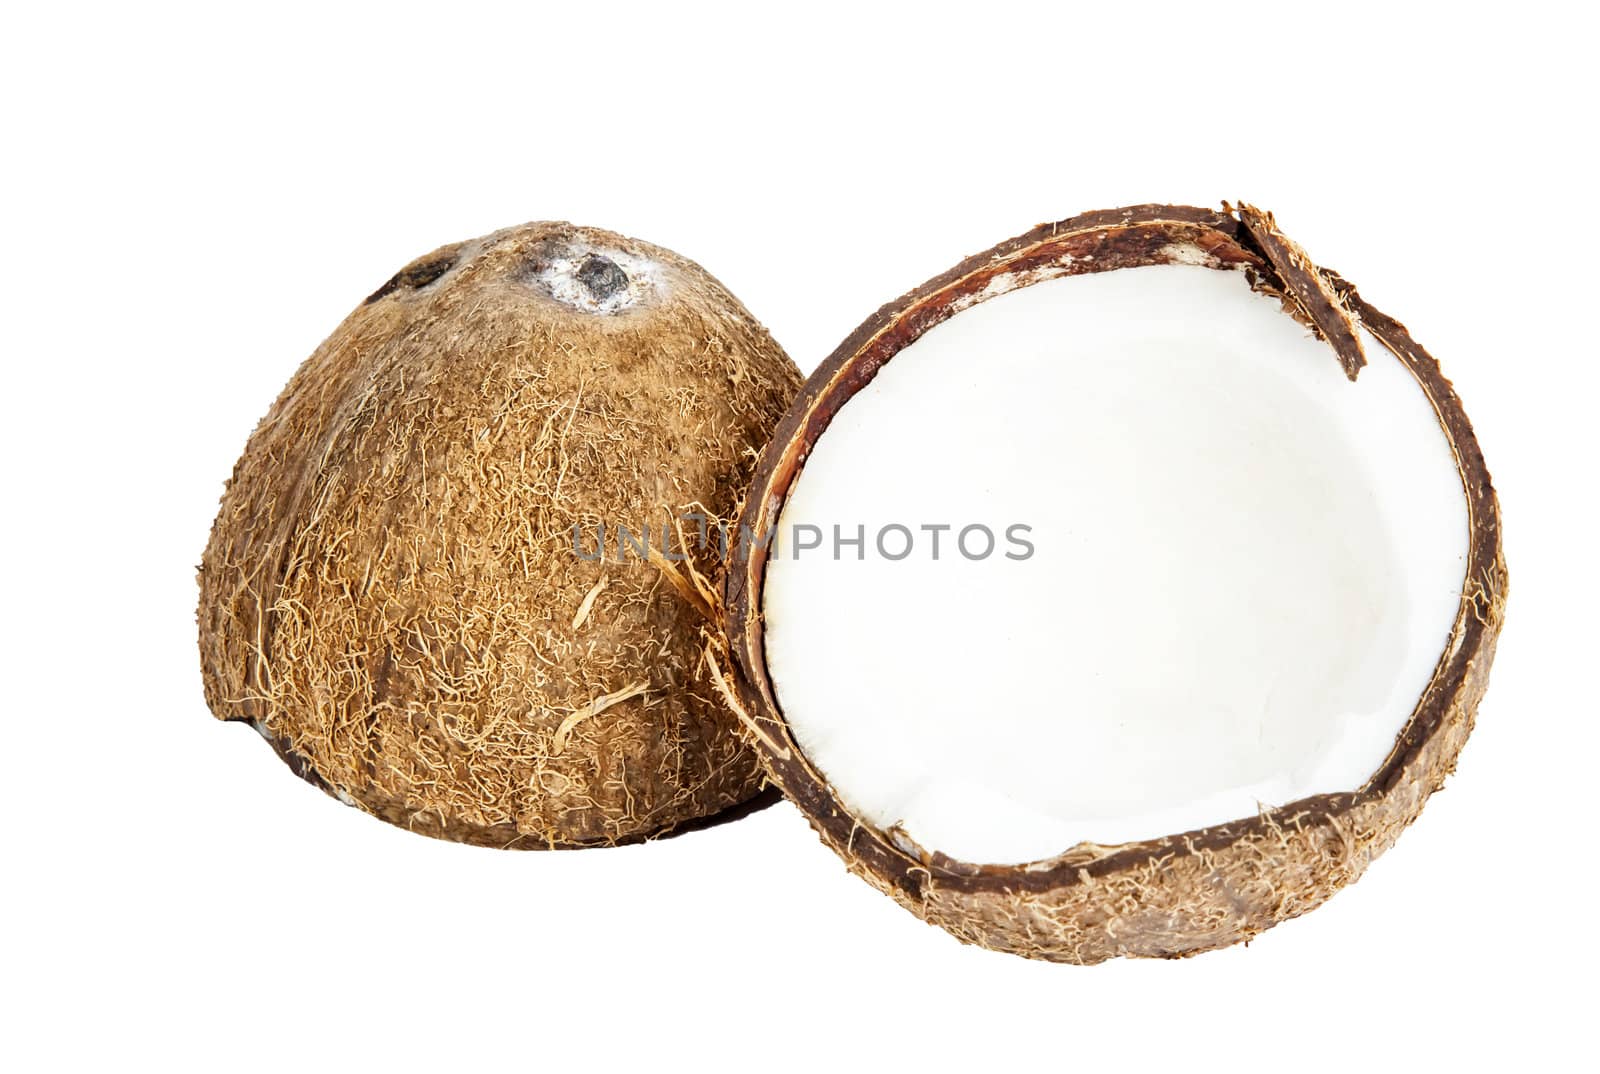 Two halves of coconut 